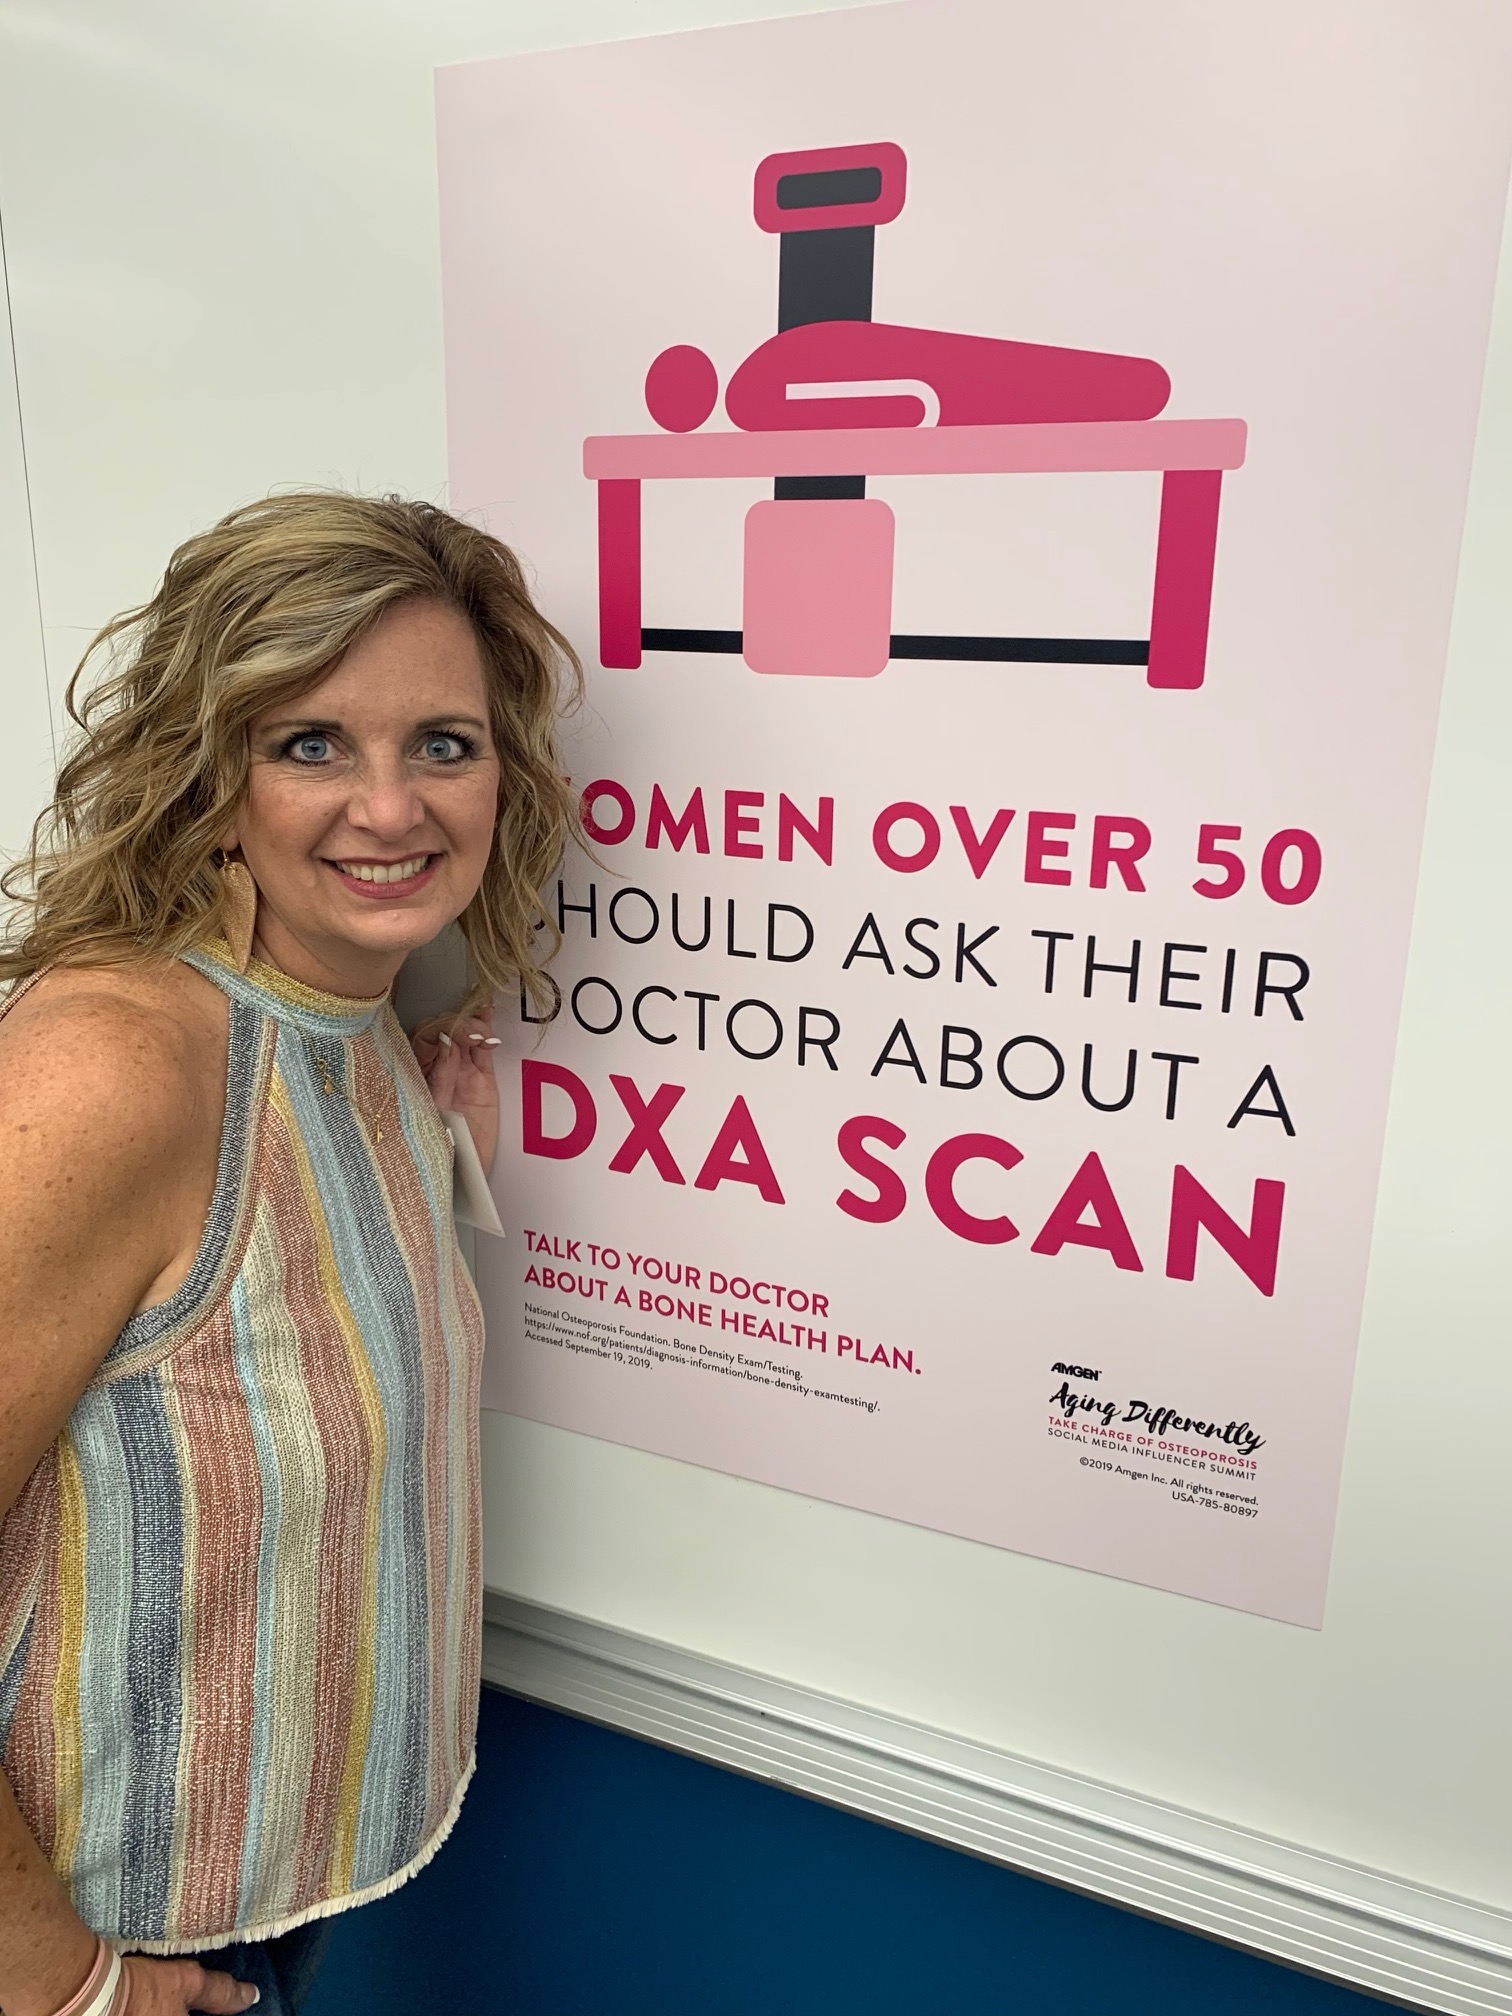 DXA Scan and Why It’s Important